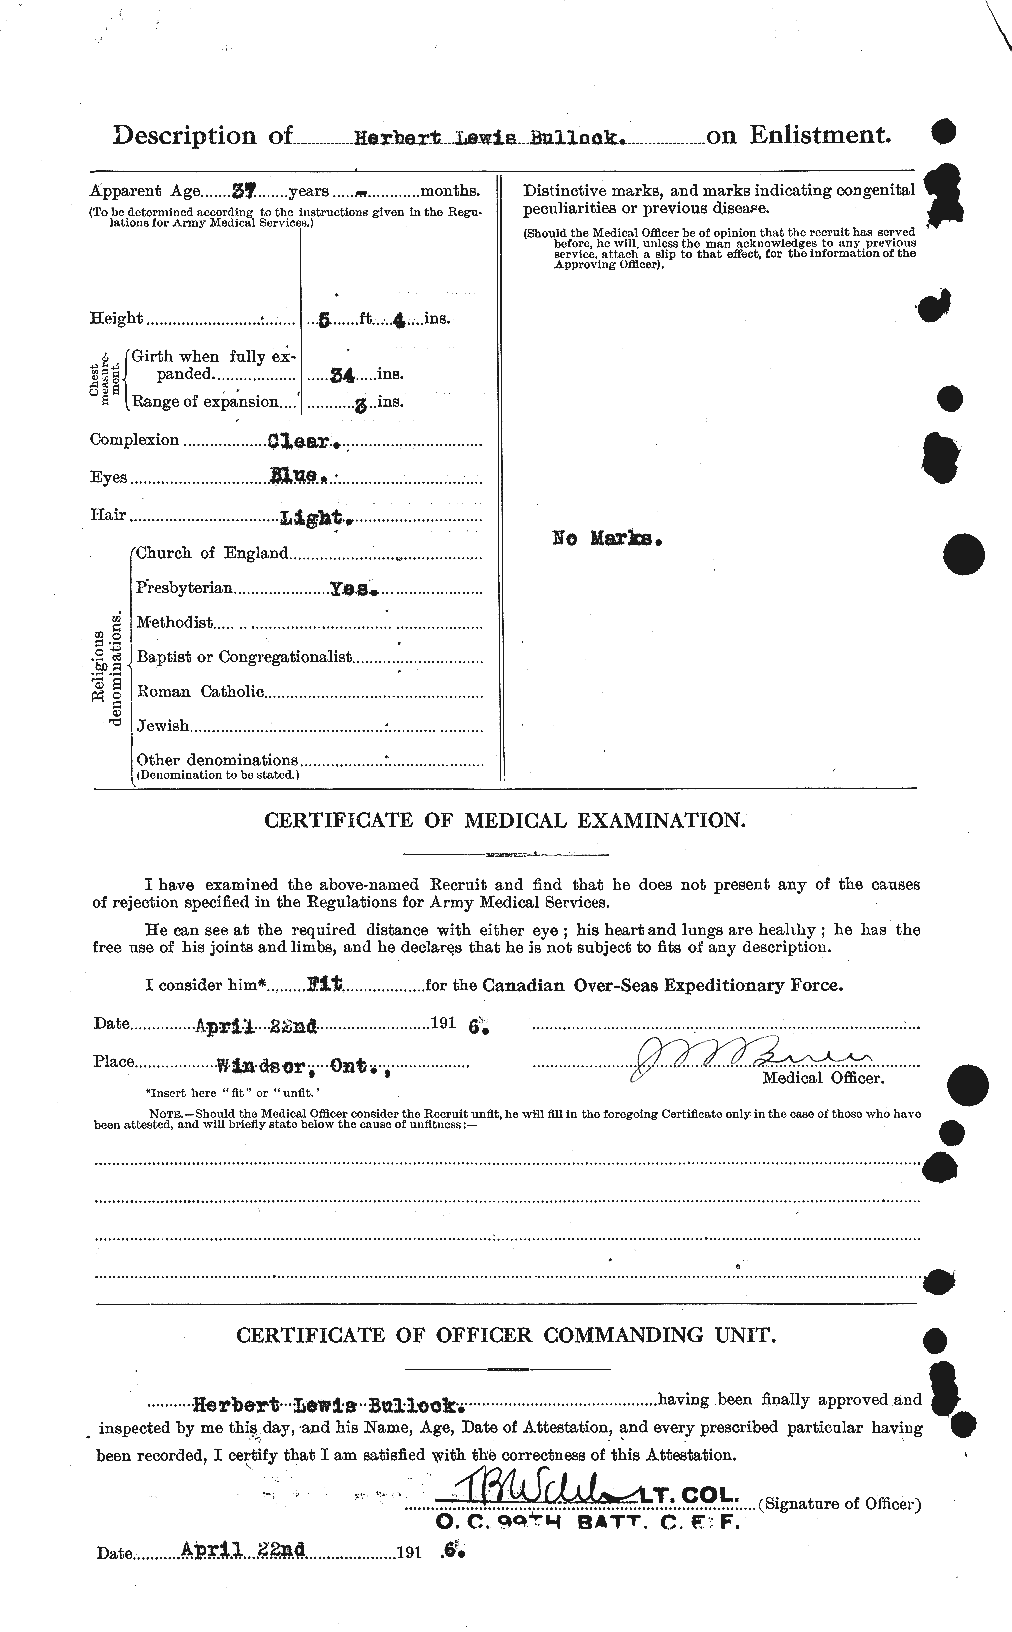 Personnel Records of the First World War - CEF 269717b